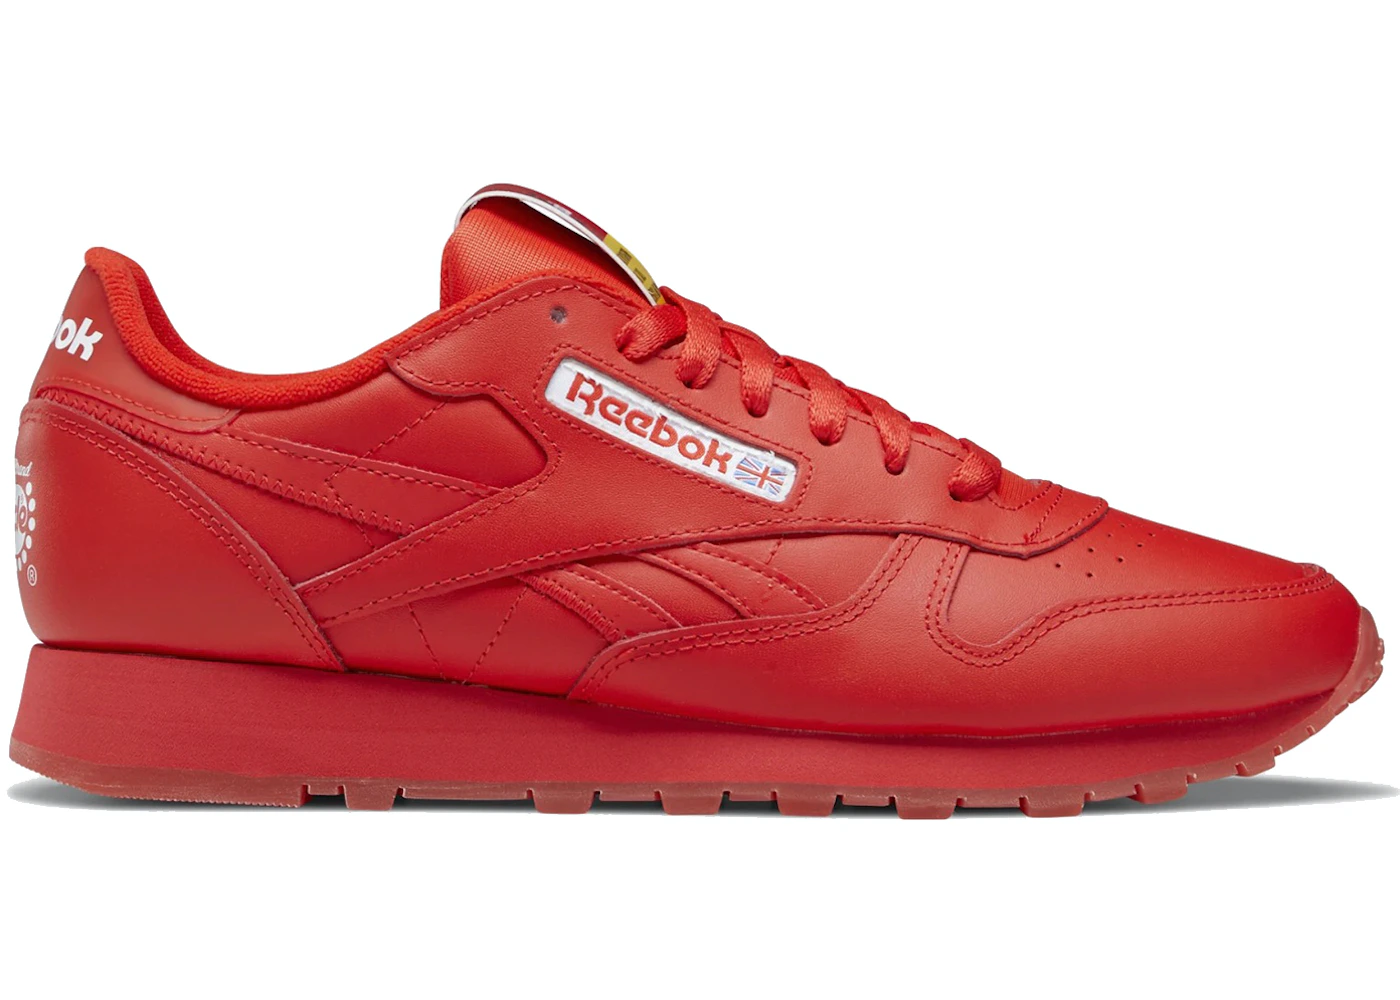 Reebok Classic Leather Popsicle Instinct Red Men's - GY2436 - US